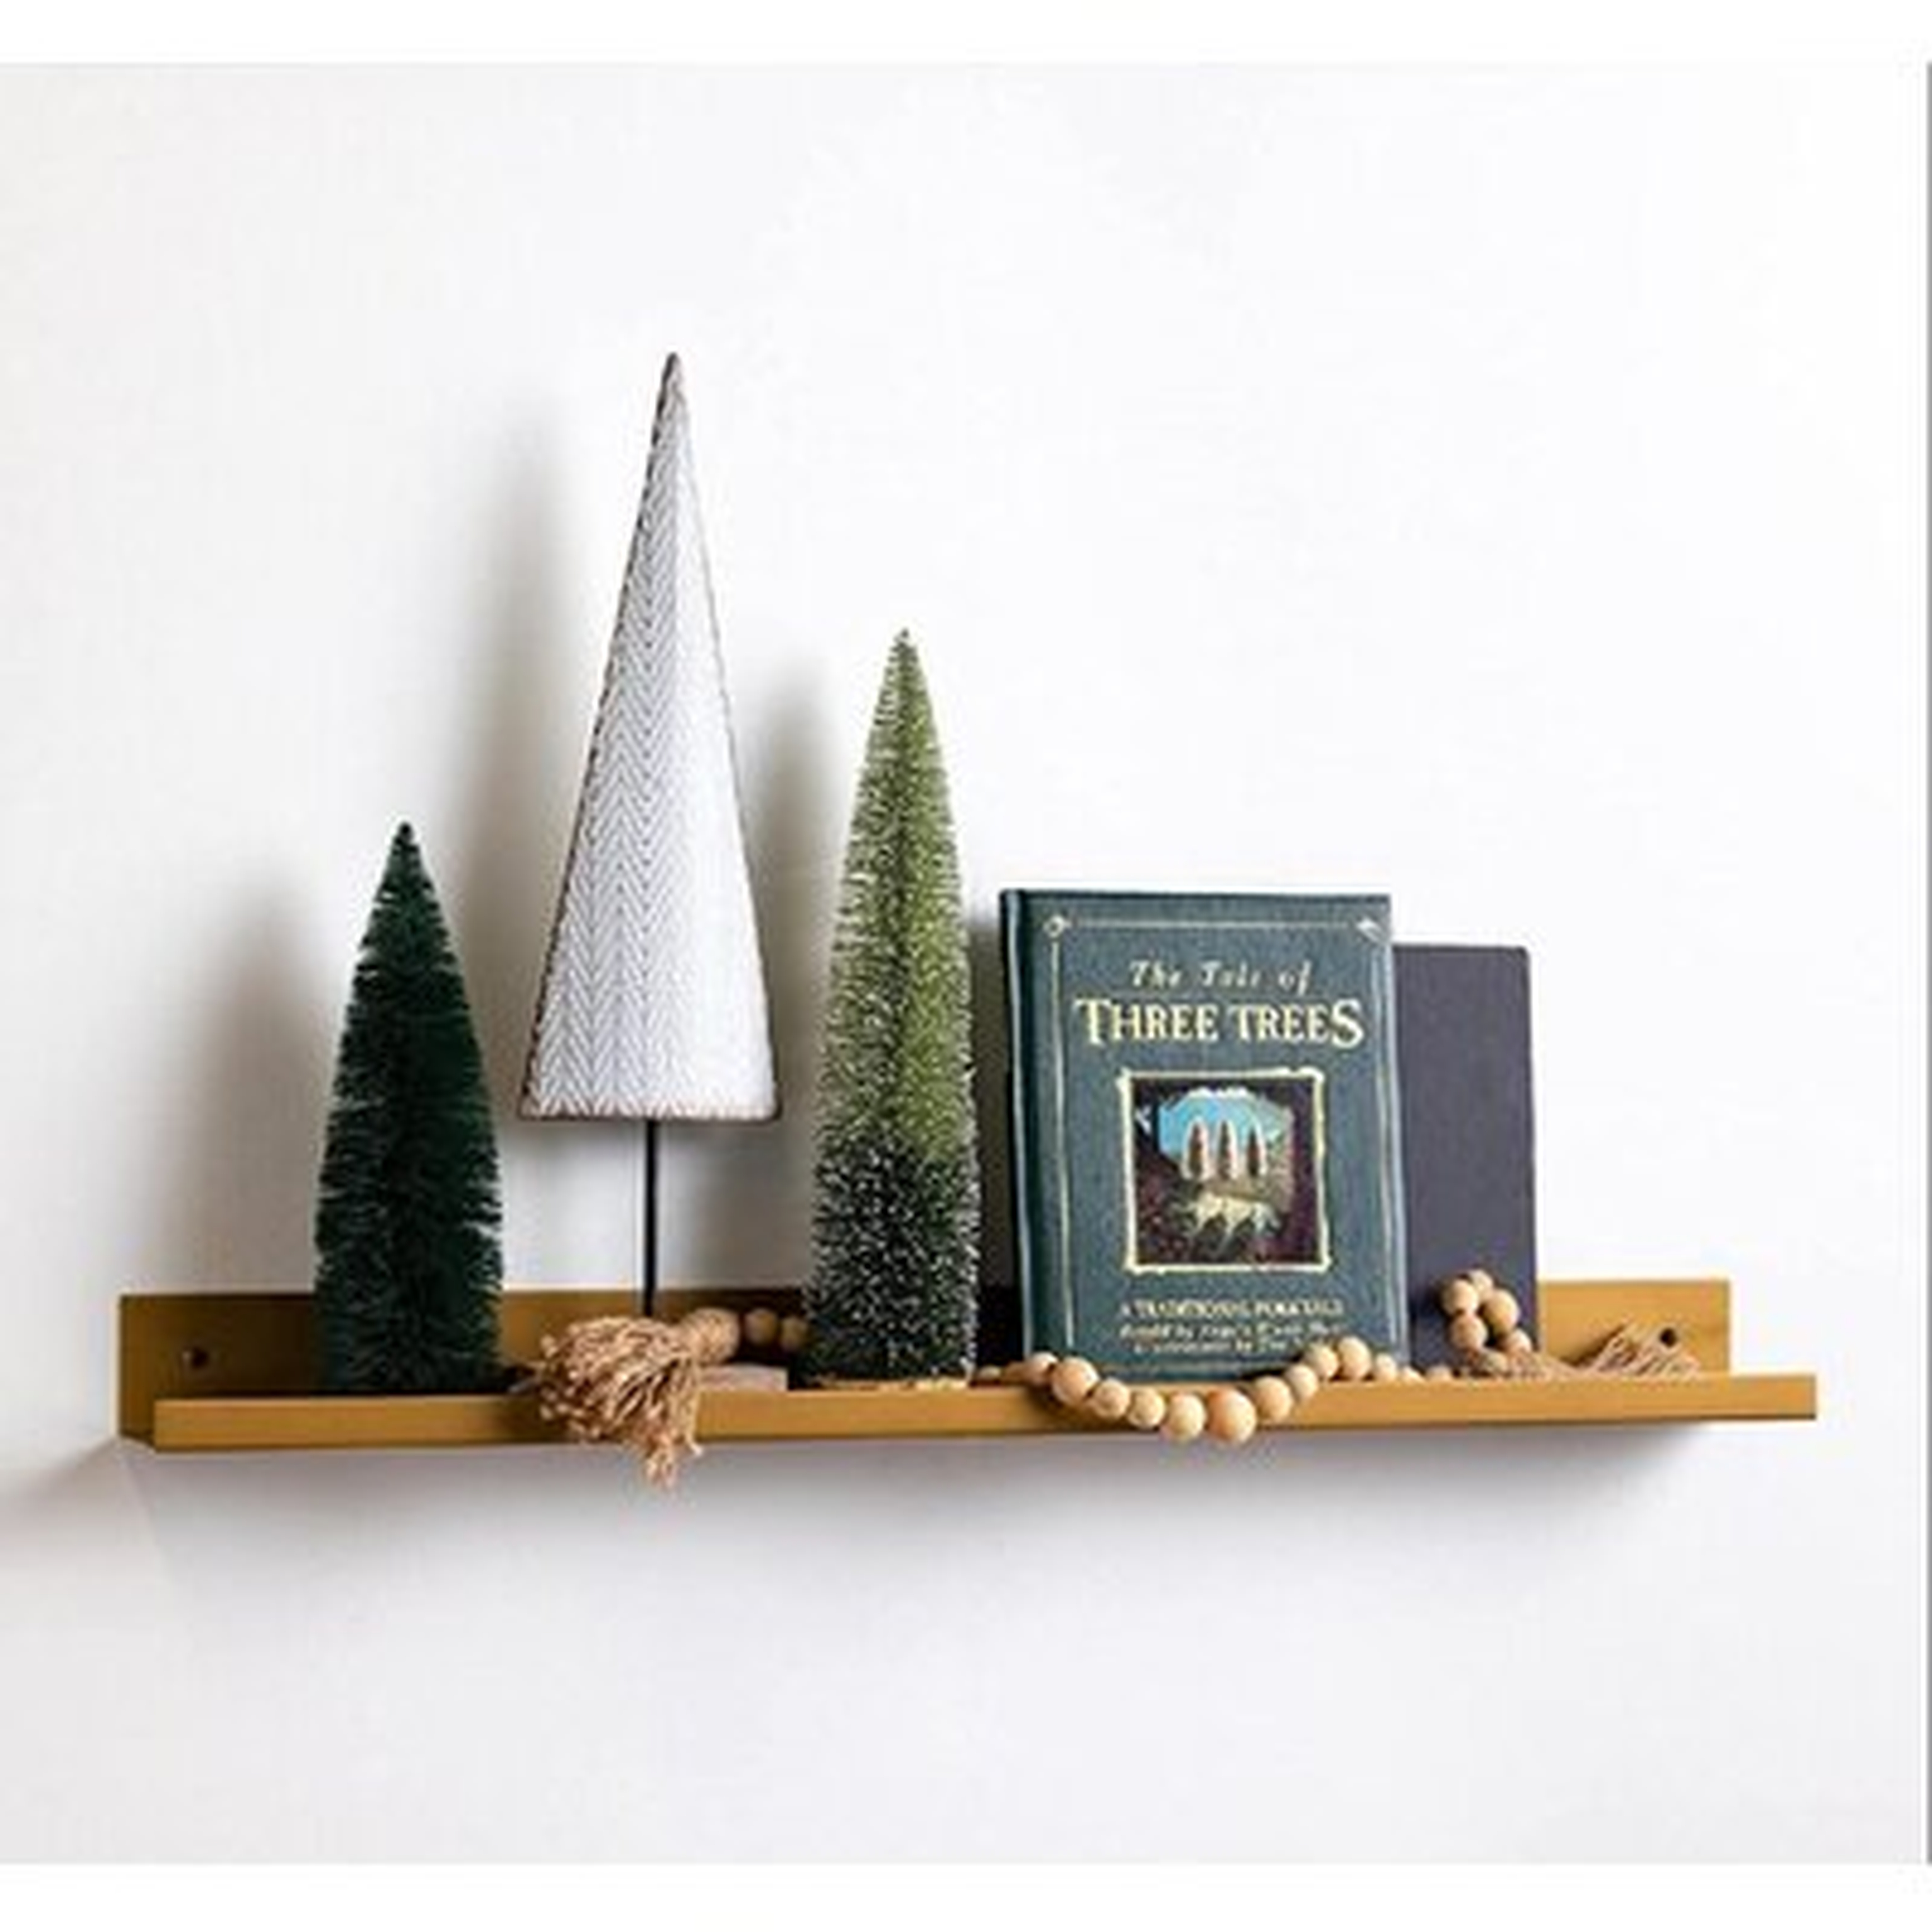 Floating Metal Wall Shelf – Minimalist Premium Floating Shelves Made In USA | Easily Mounted, Perfect Floating Shelf For Your Living Room, Kitchen, Bathroom Or Bedroom 1 N/A - Wayfair